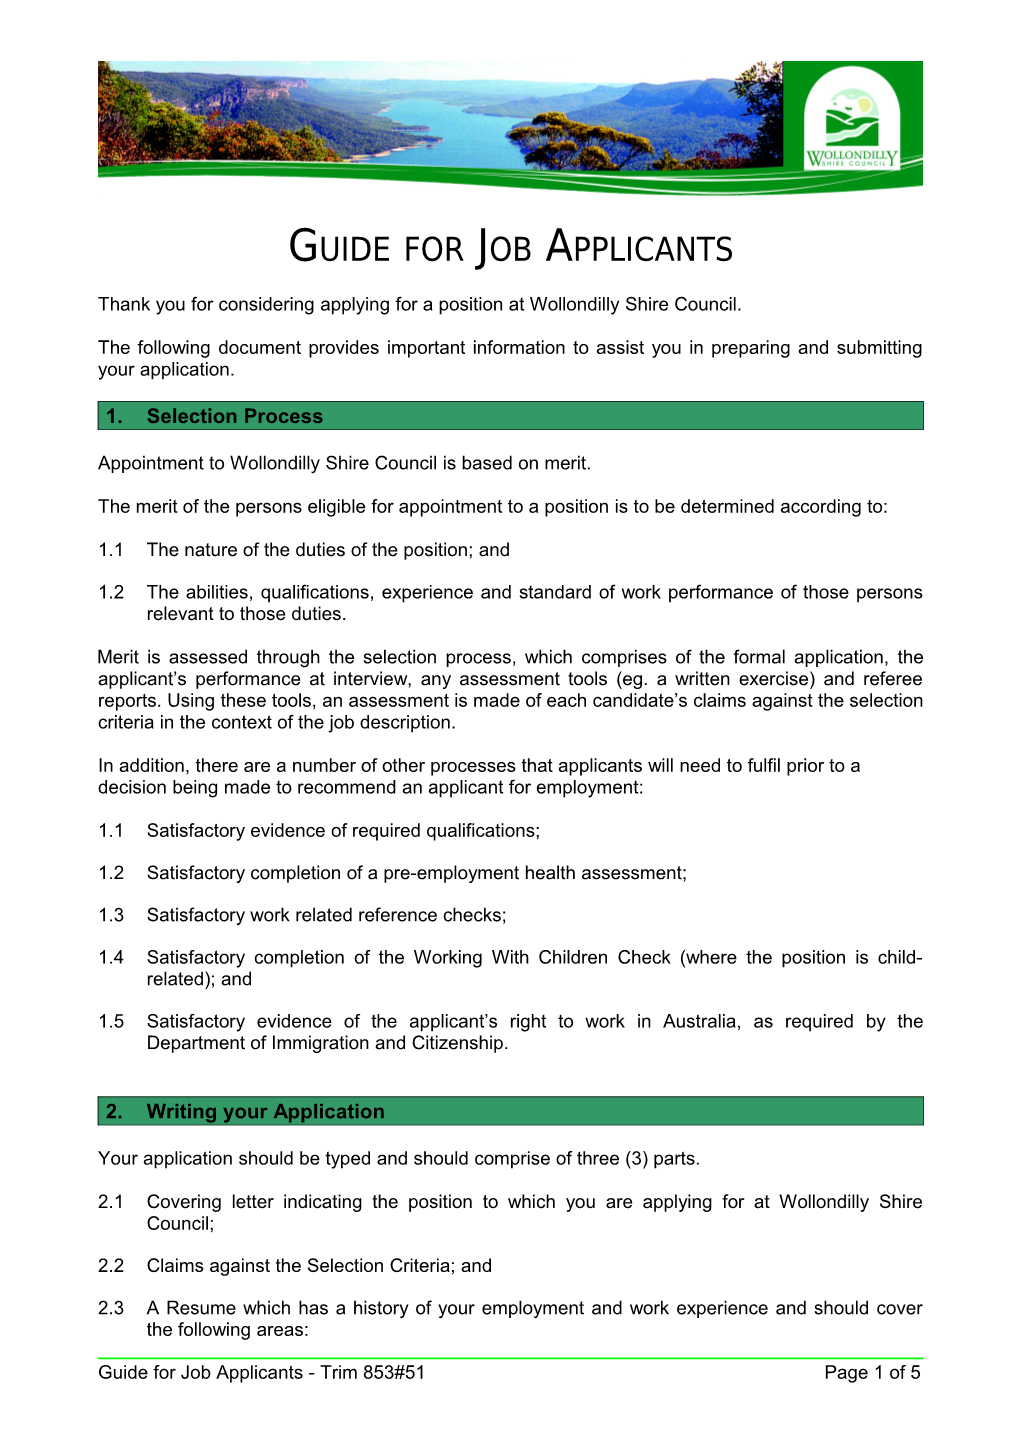 Guide for Job Applicants